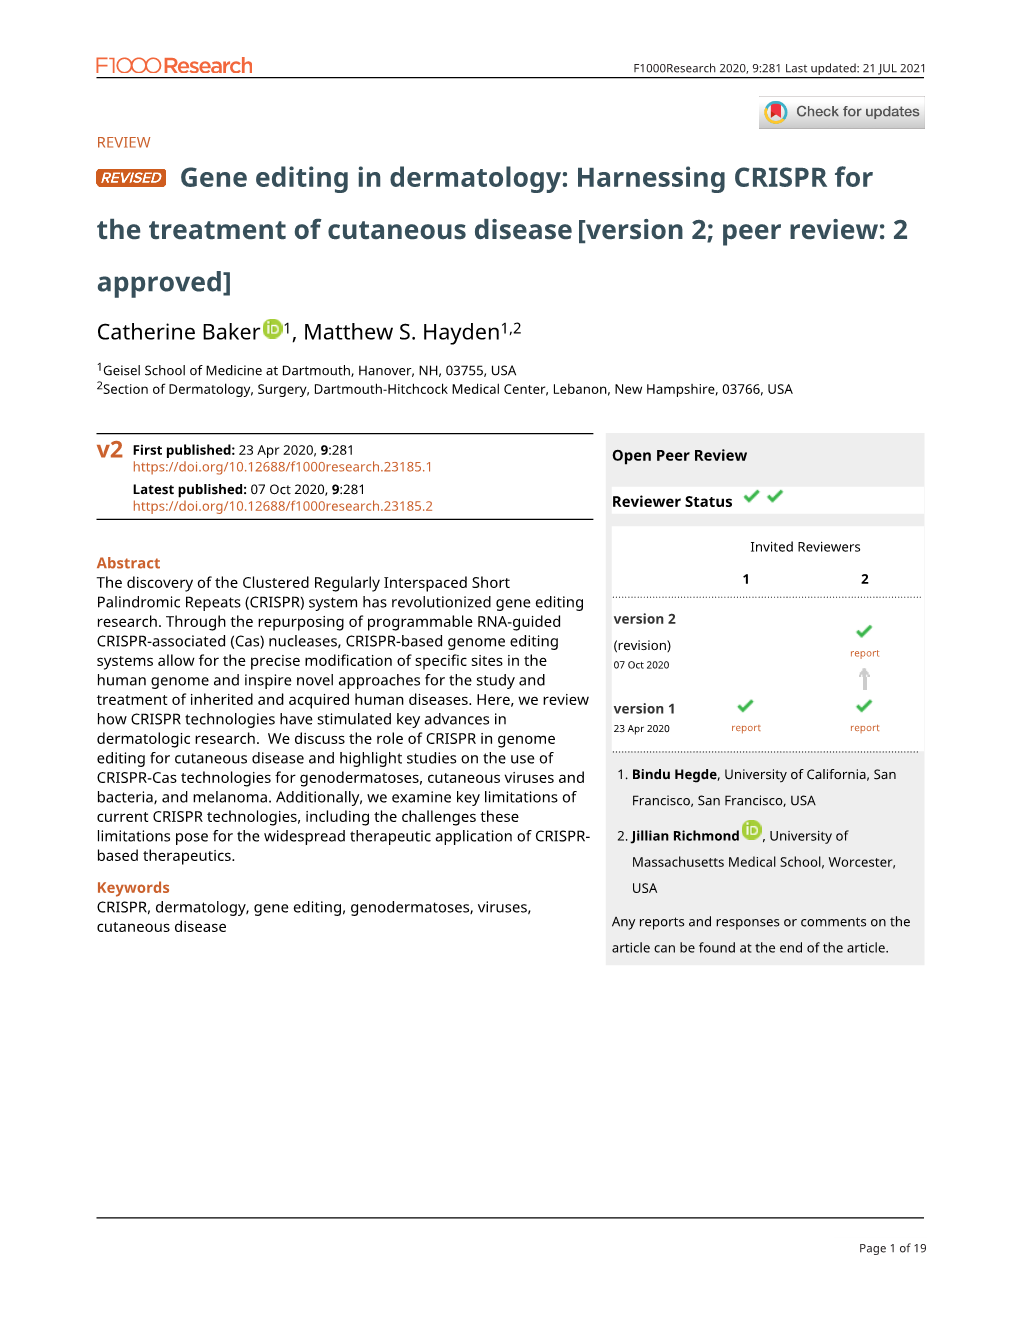 Gene Editing in Dermatology: Harnessing CRISPR for the Treatment of Cutaneous Disease [Version 2; Peer Review: 2 Approved]